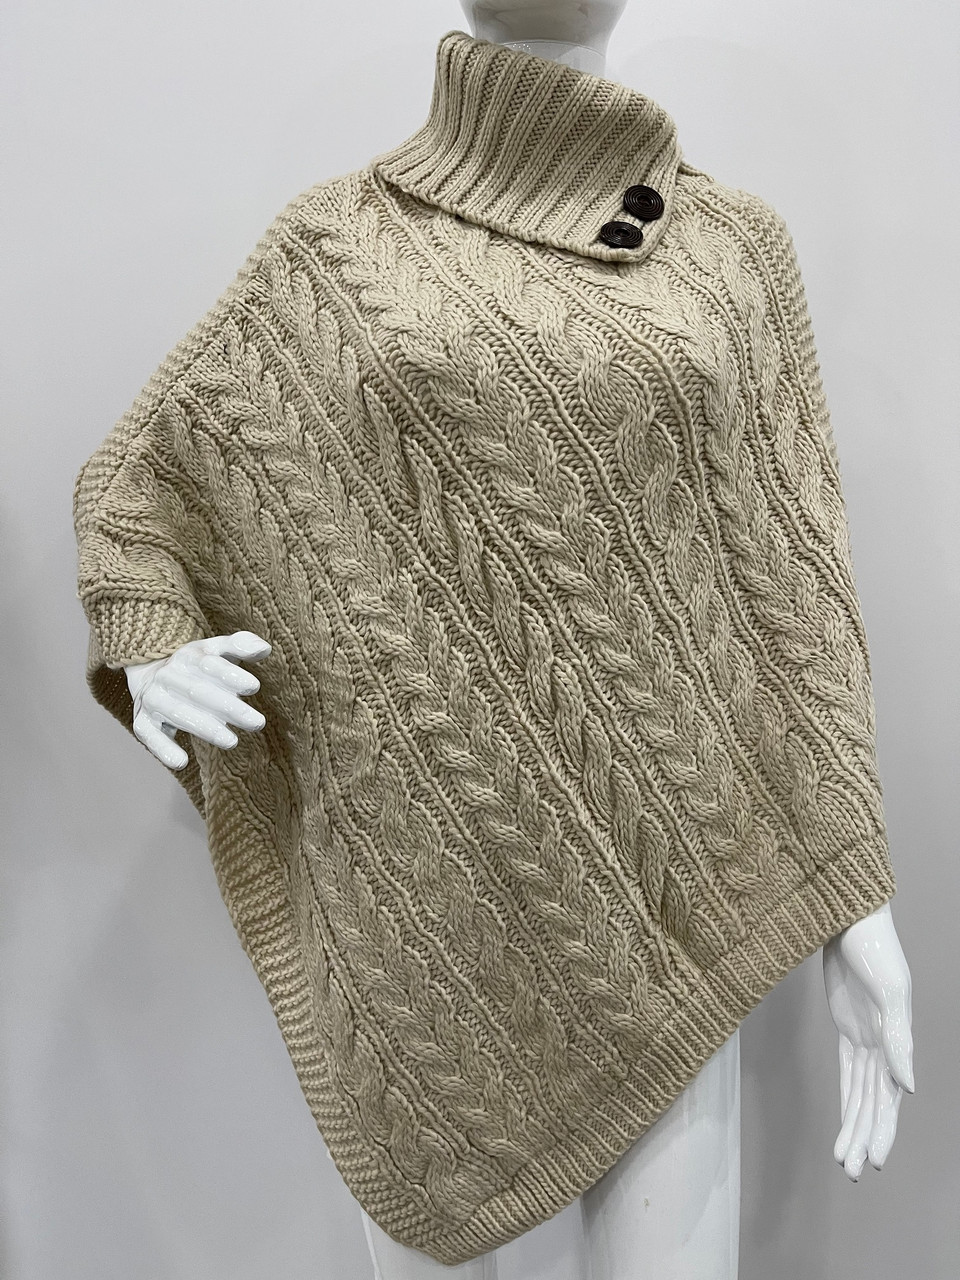 The Cable Knit Poncho Sweater –